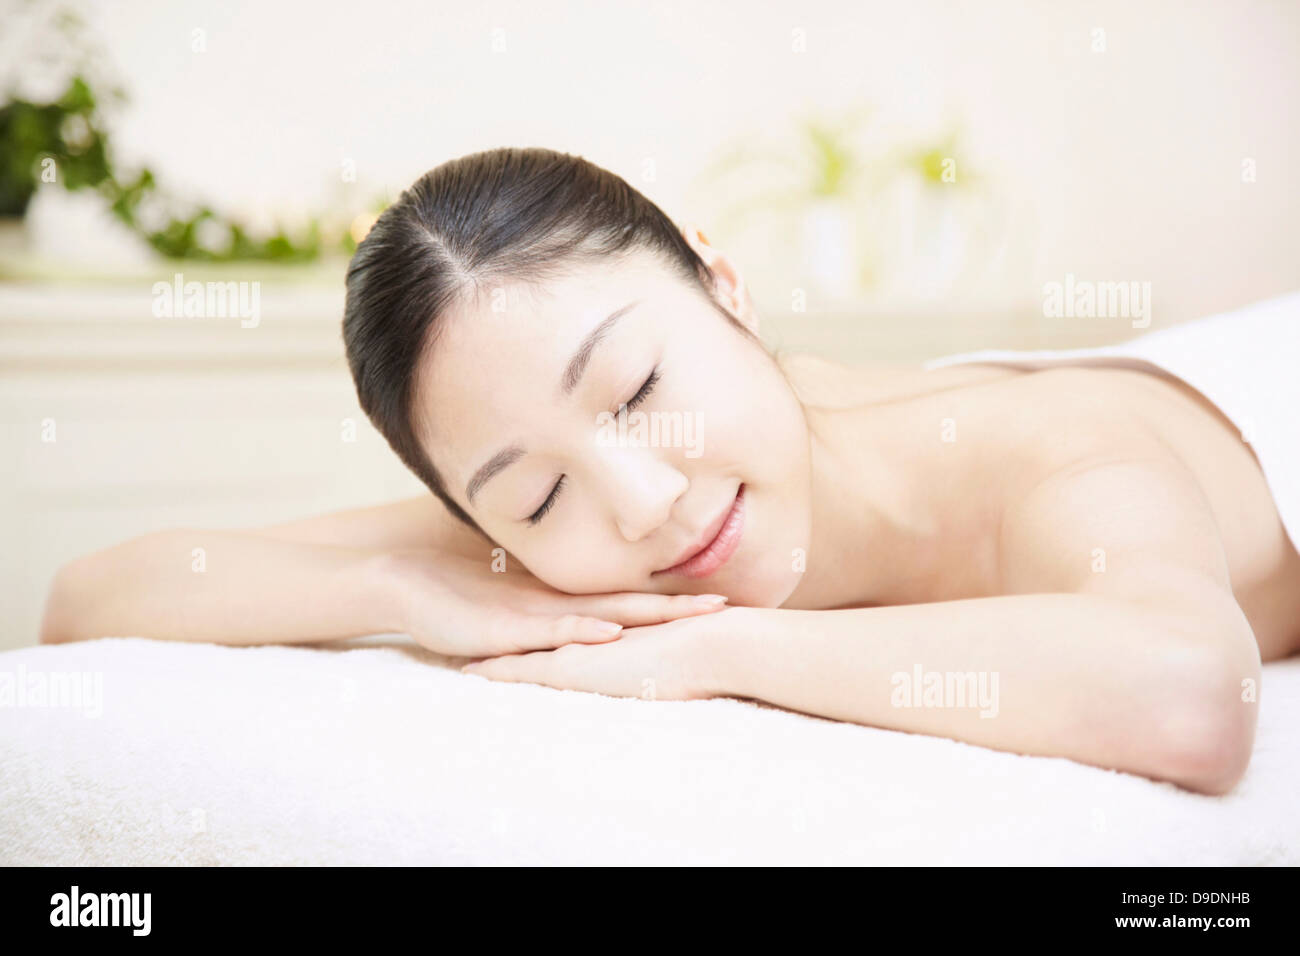 Woman lying on front in spa, eyes closed Stock Photo